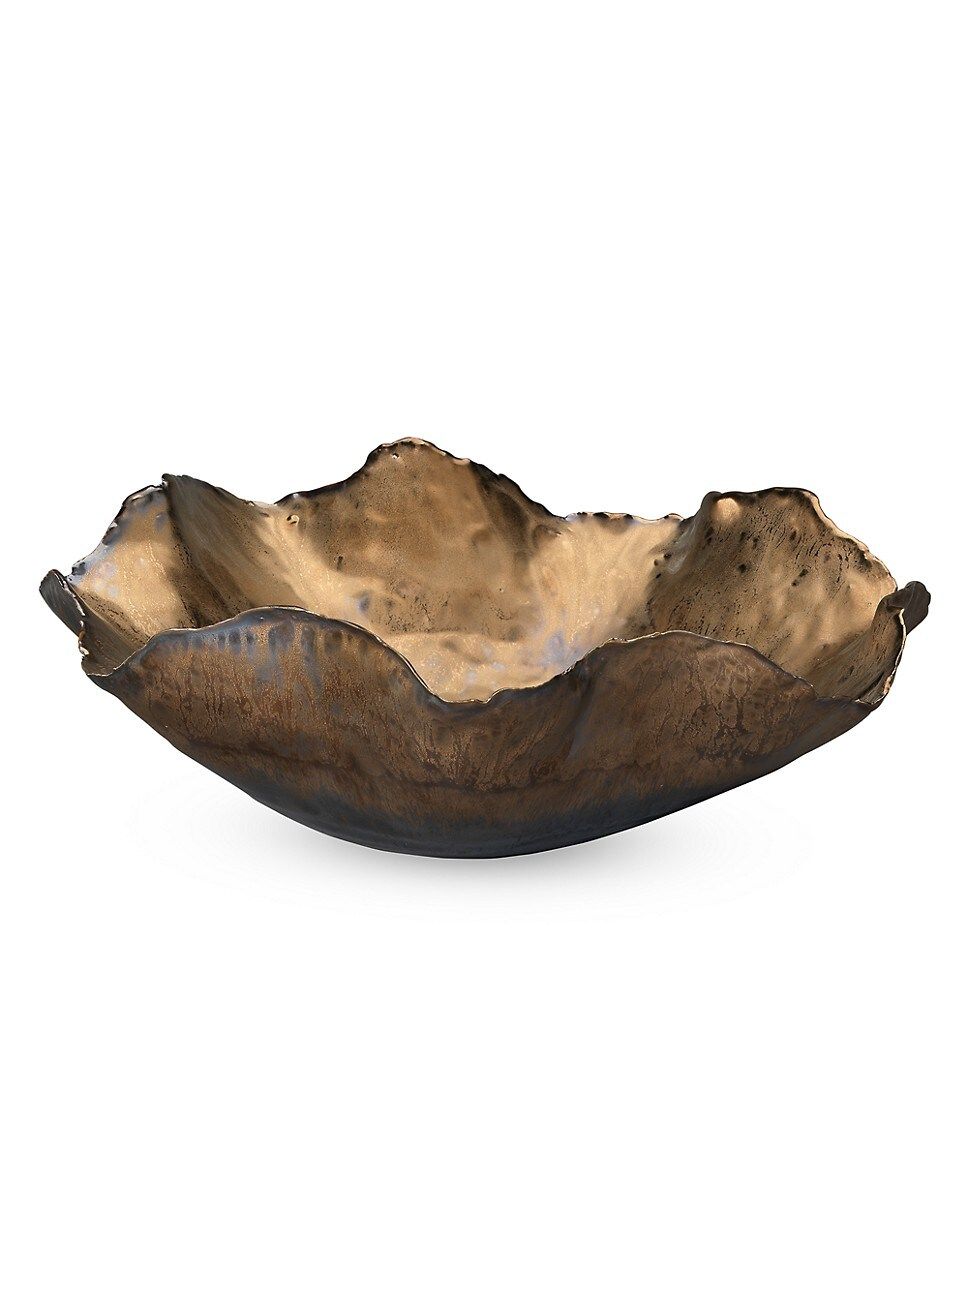 Peony Large Antique Gold Catchall Bowl | Saks Fifth Avenue